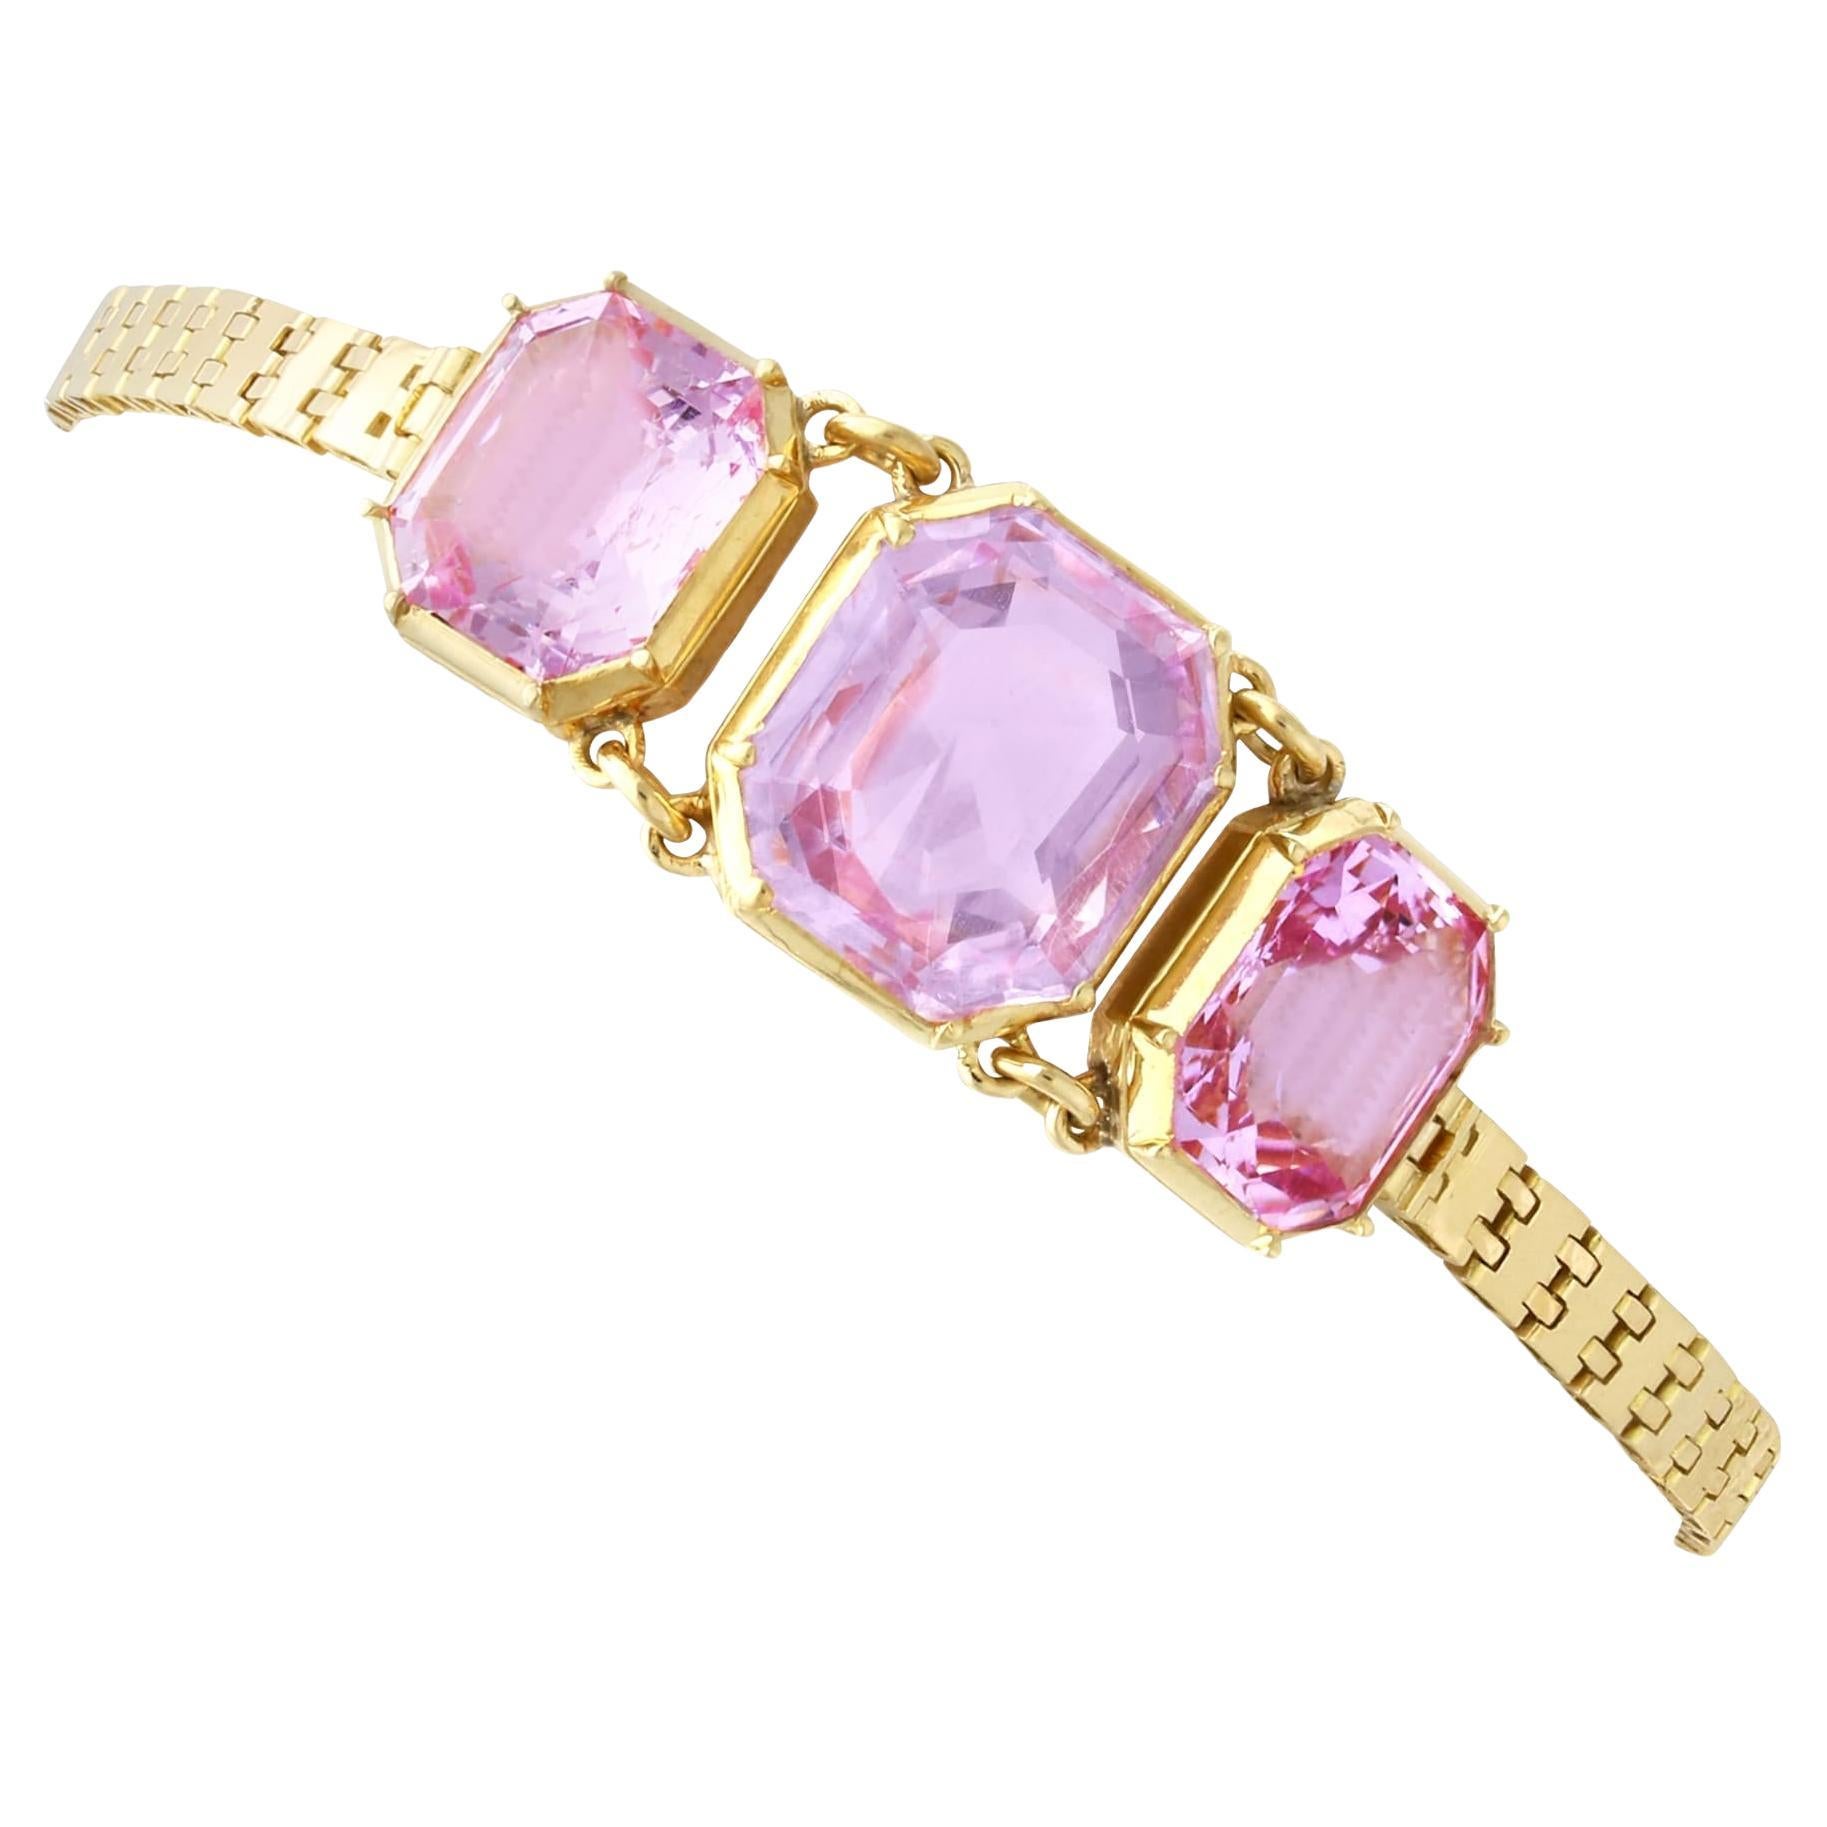 Antique 13.20Ct Pink Topaz and 18k Yellow Gold Bracelet Circa 1840 For Sale